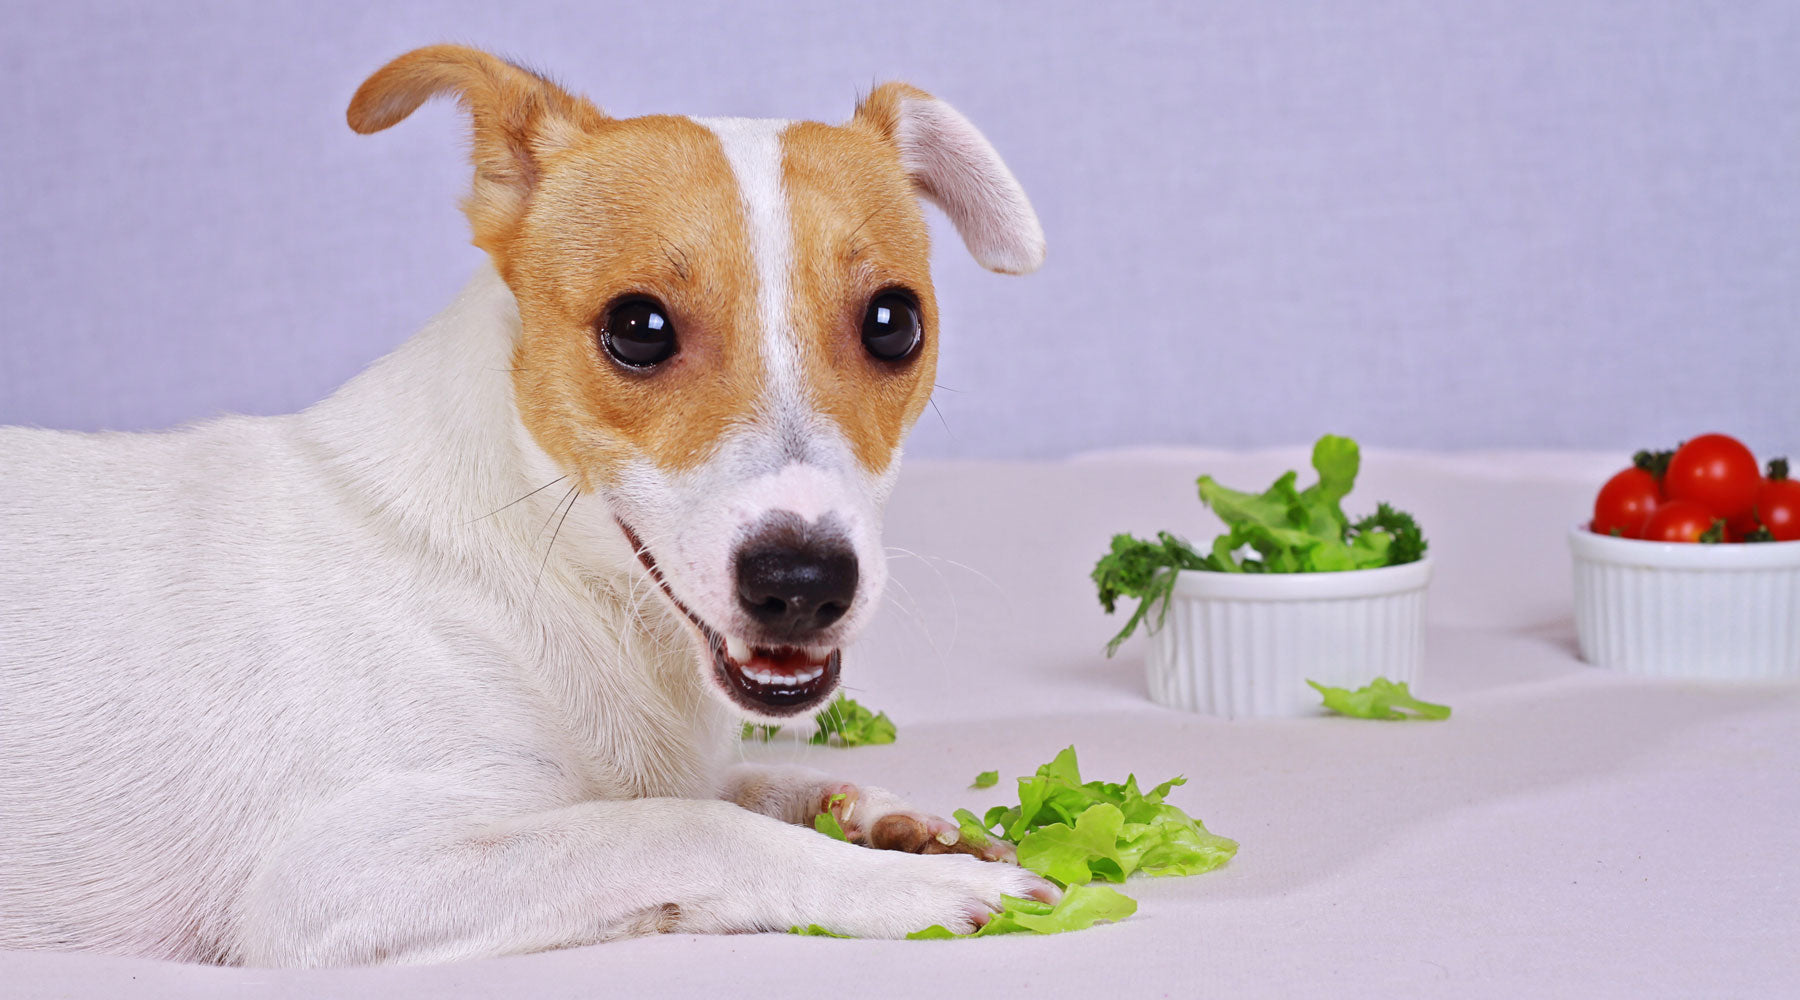 Healthy Living for Dogs: How To Find Dog Food for a Sensitive Stomach